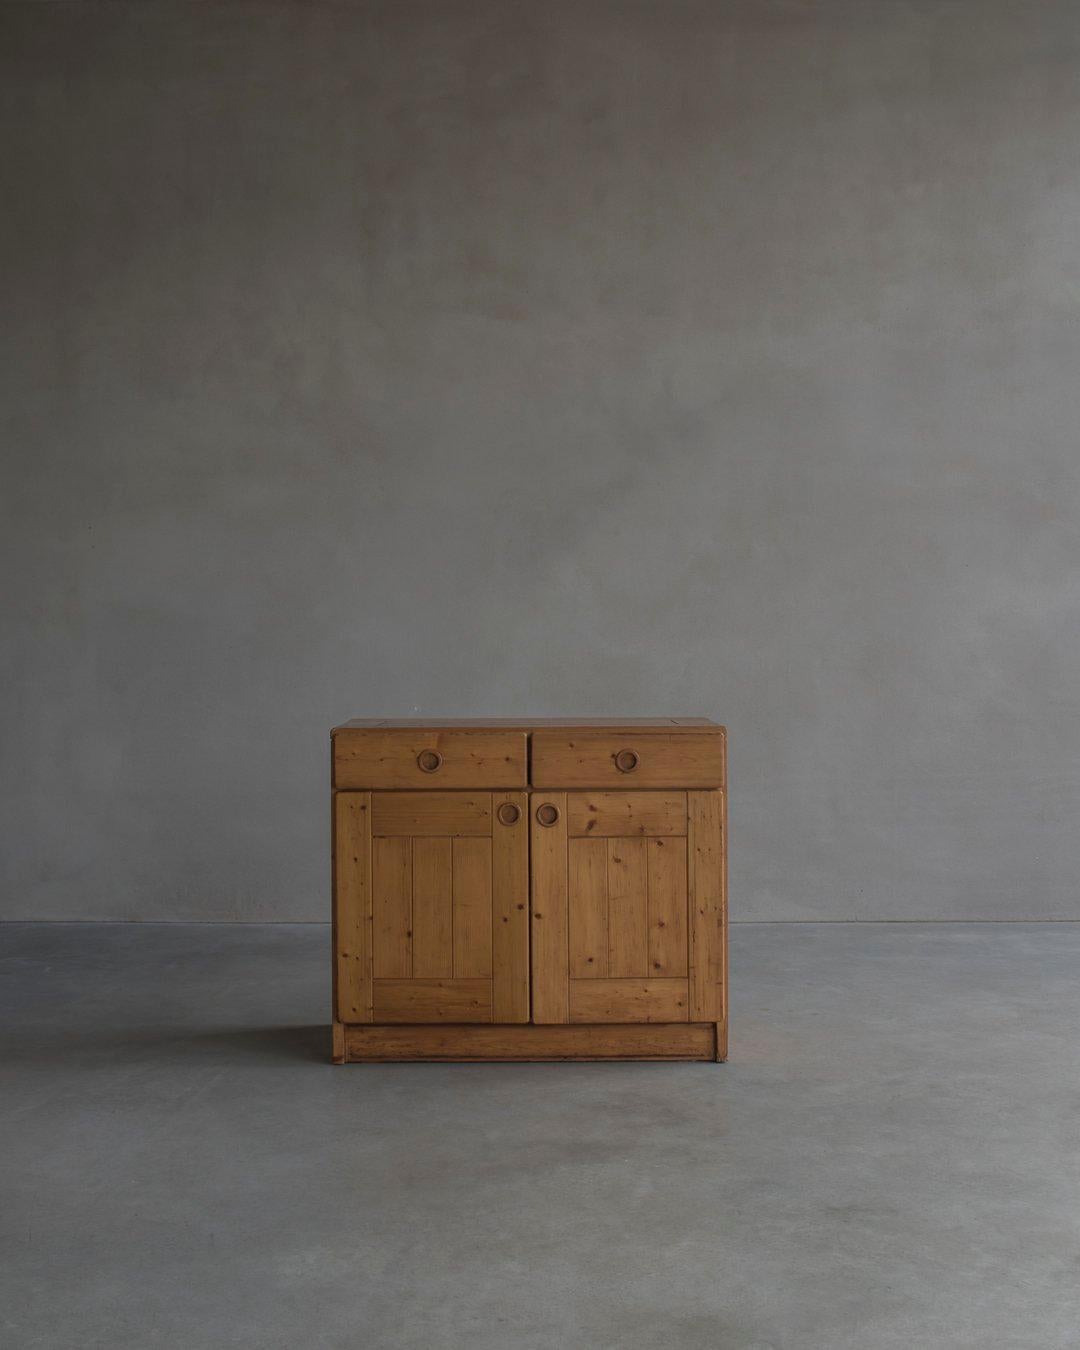 The Les Arc Sideboard by Charlotte Perriand - a stunning piece of furniture that seamlessly blends functionality and style. Originally designed in the 1960s for the Les Arcs ski resort in France, this sideboard has since become an iconic